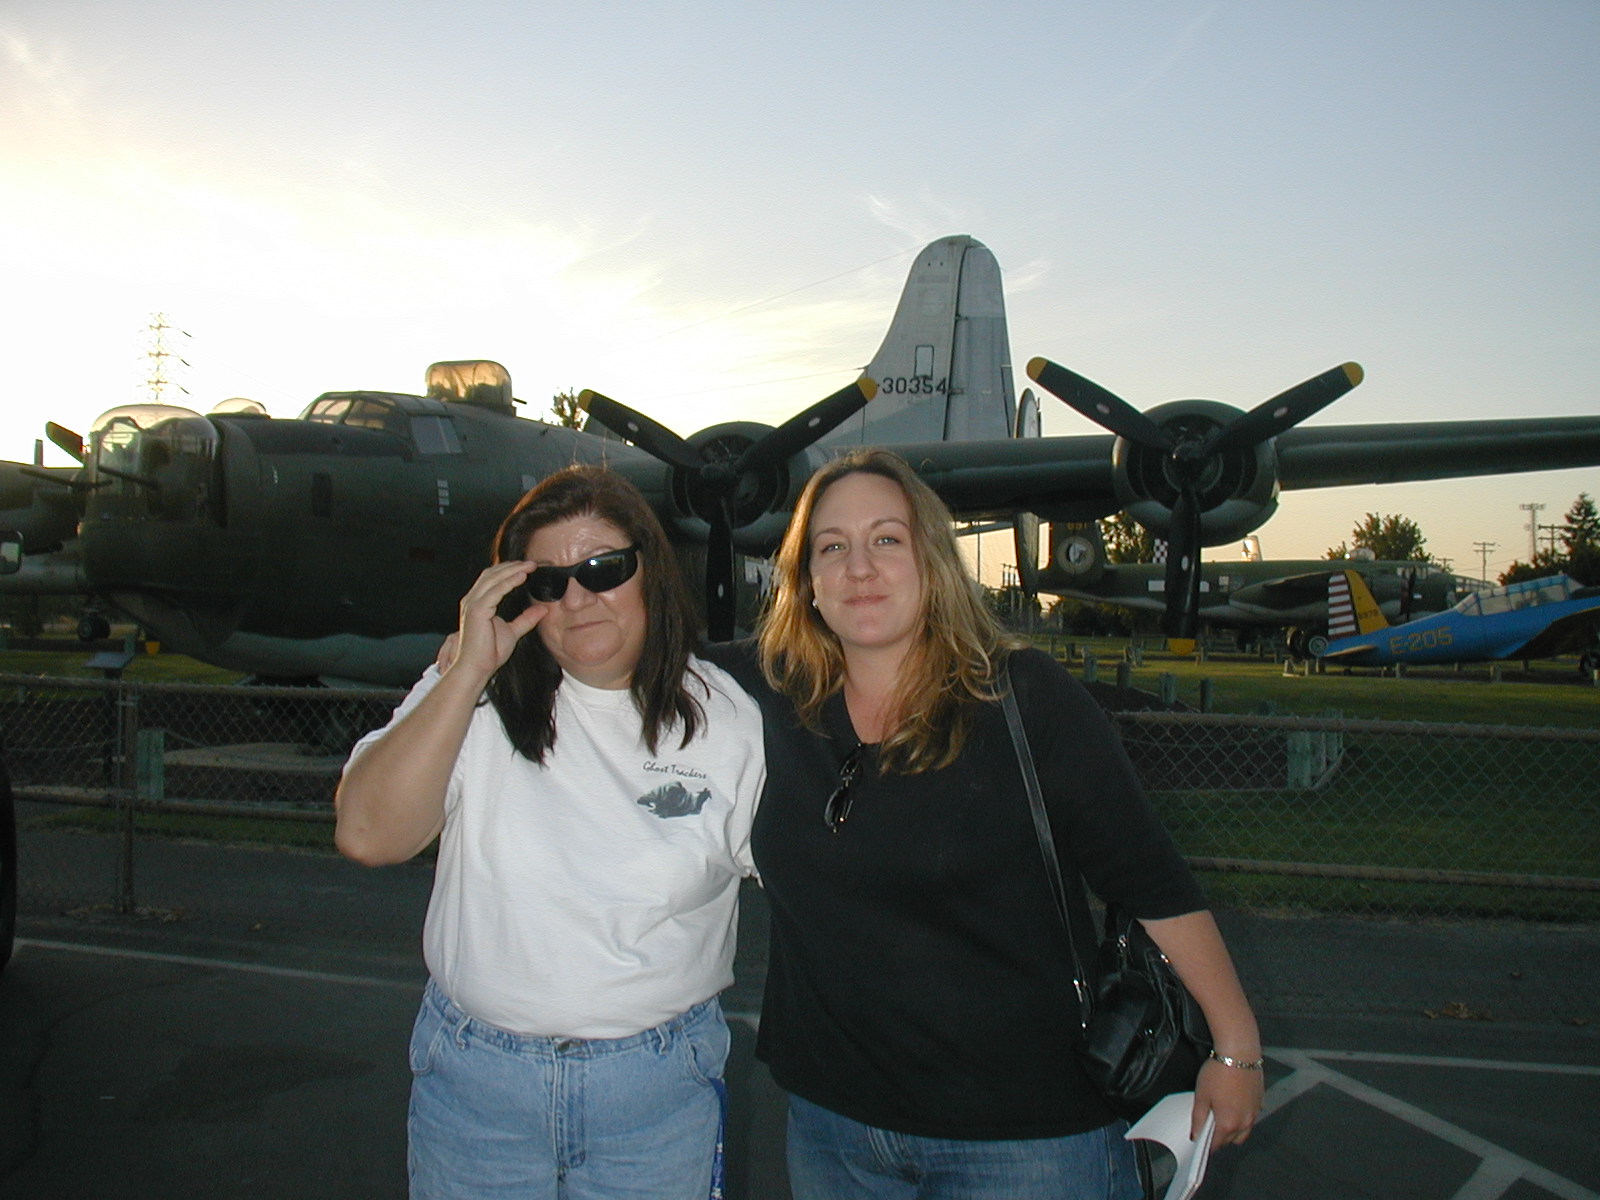 Prior to filming and investigation at the Castle Air Museum in Atwater, California